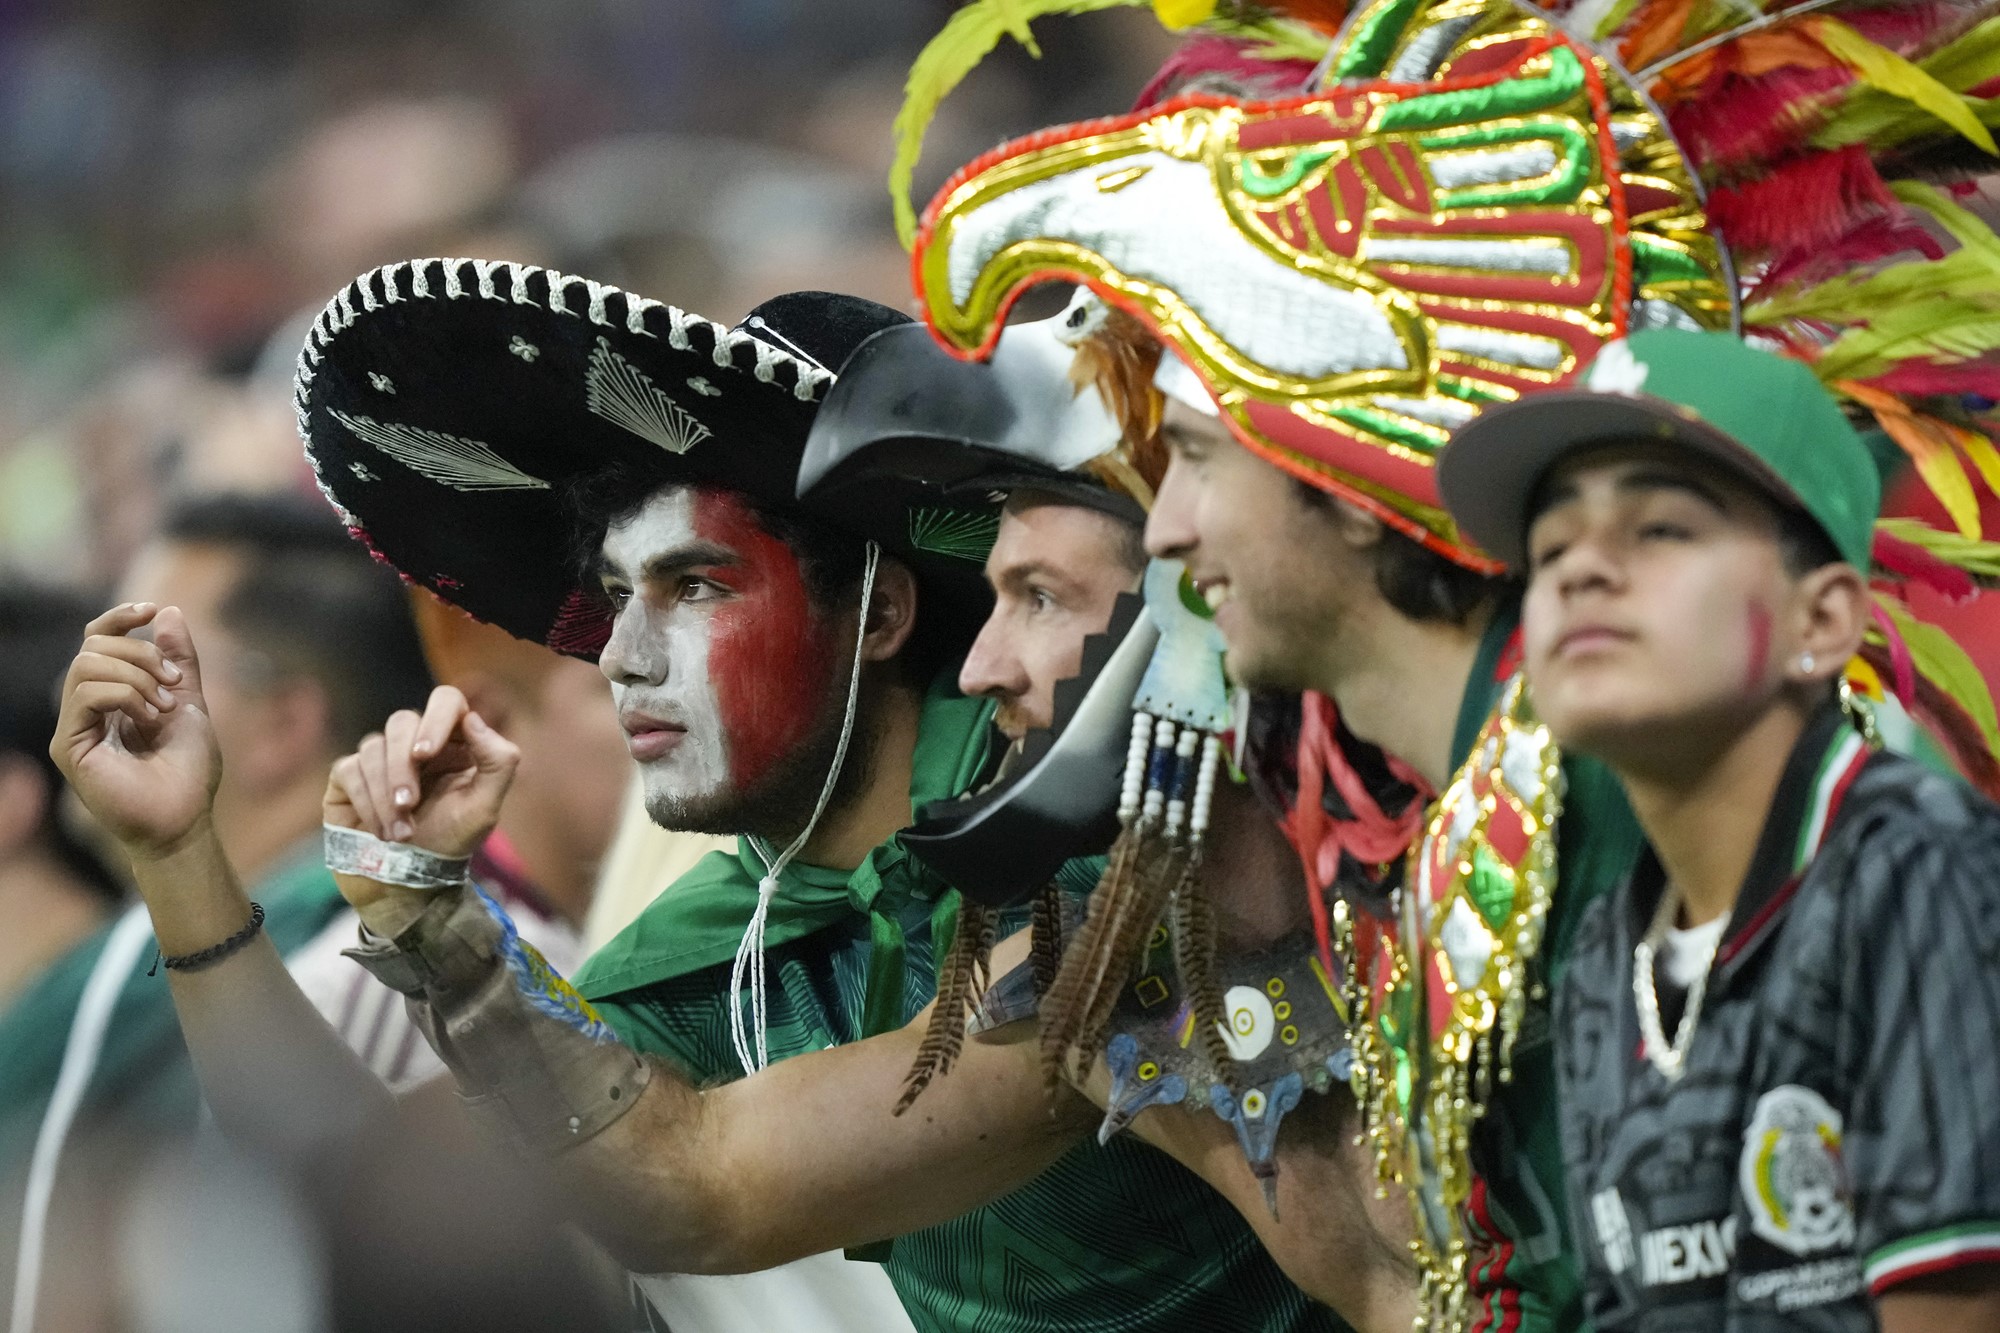 A group of Mexican football fans wearing hats and colourful gear stare at the action on the pitch during a World Cup match.